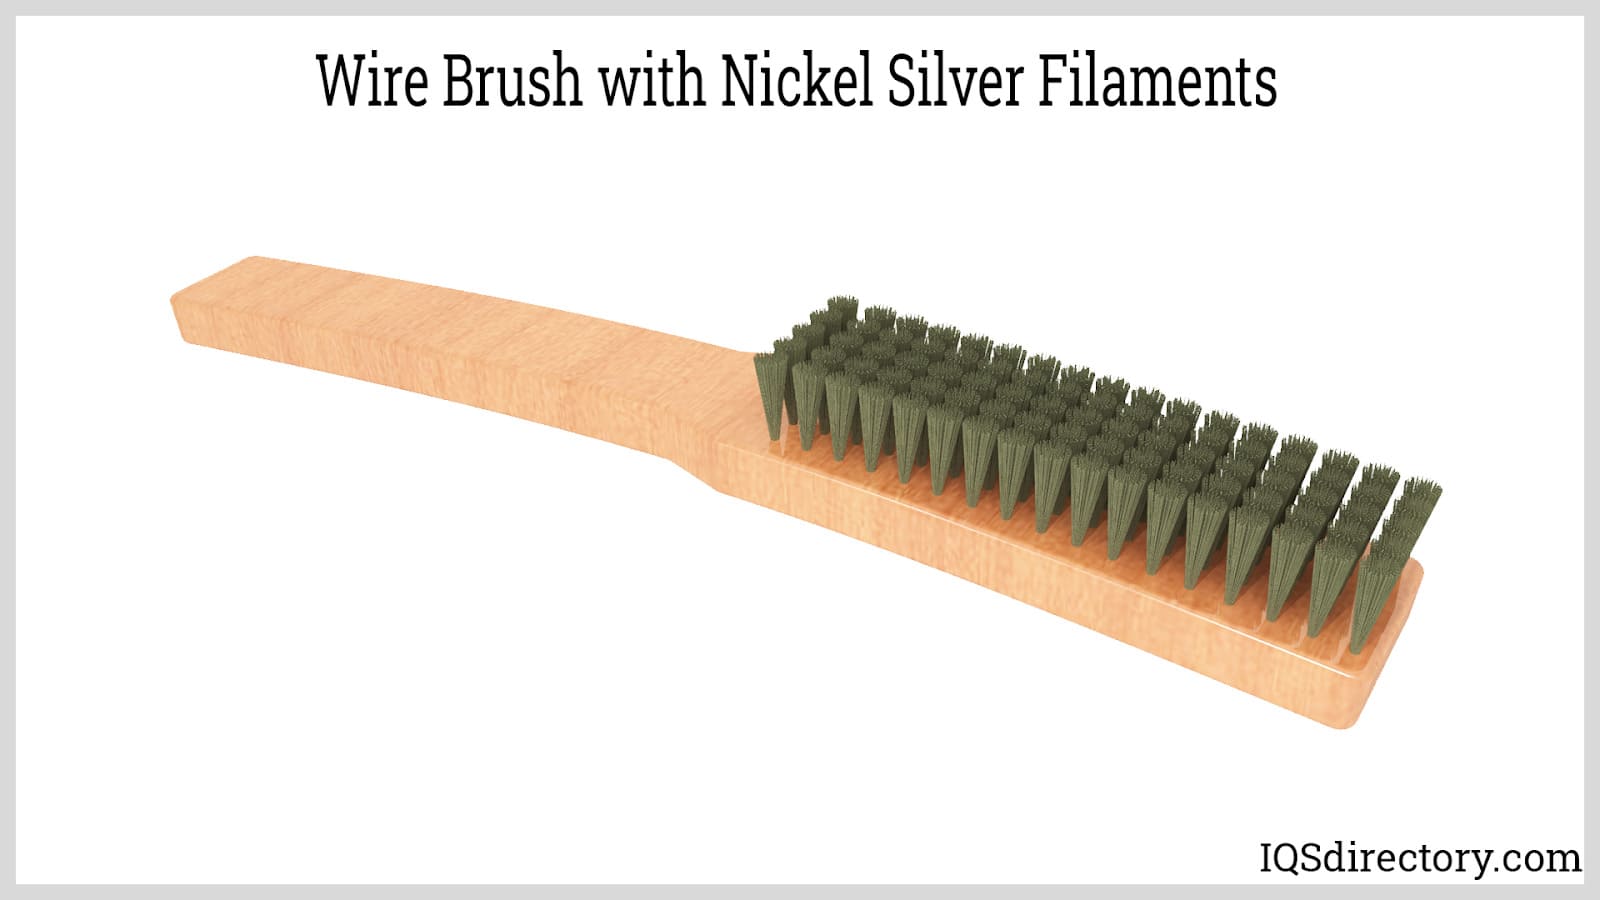 Wire Brush with Nickel Silver Filaments